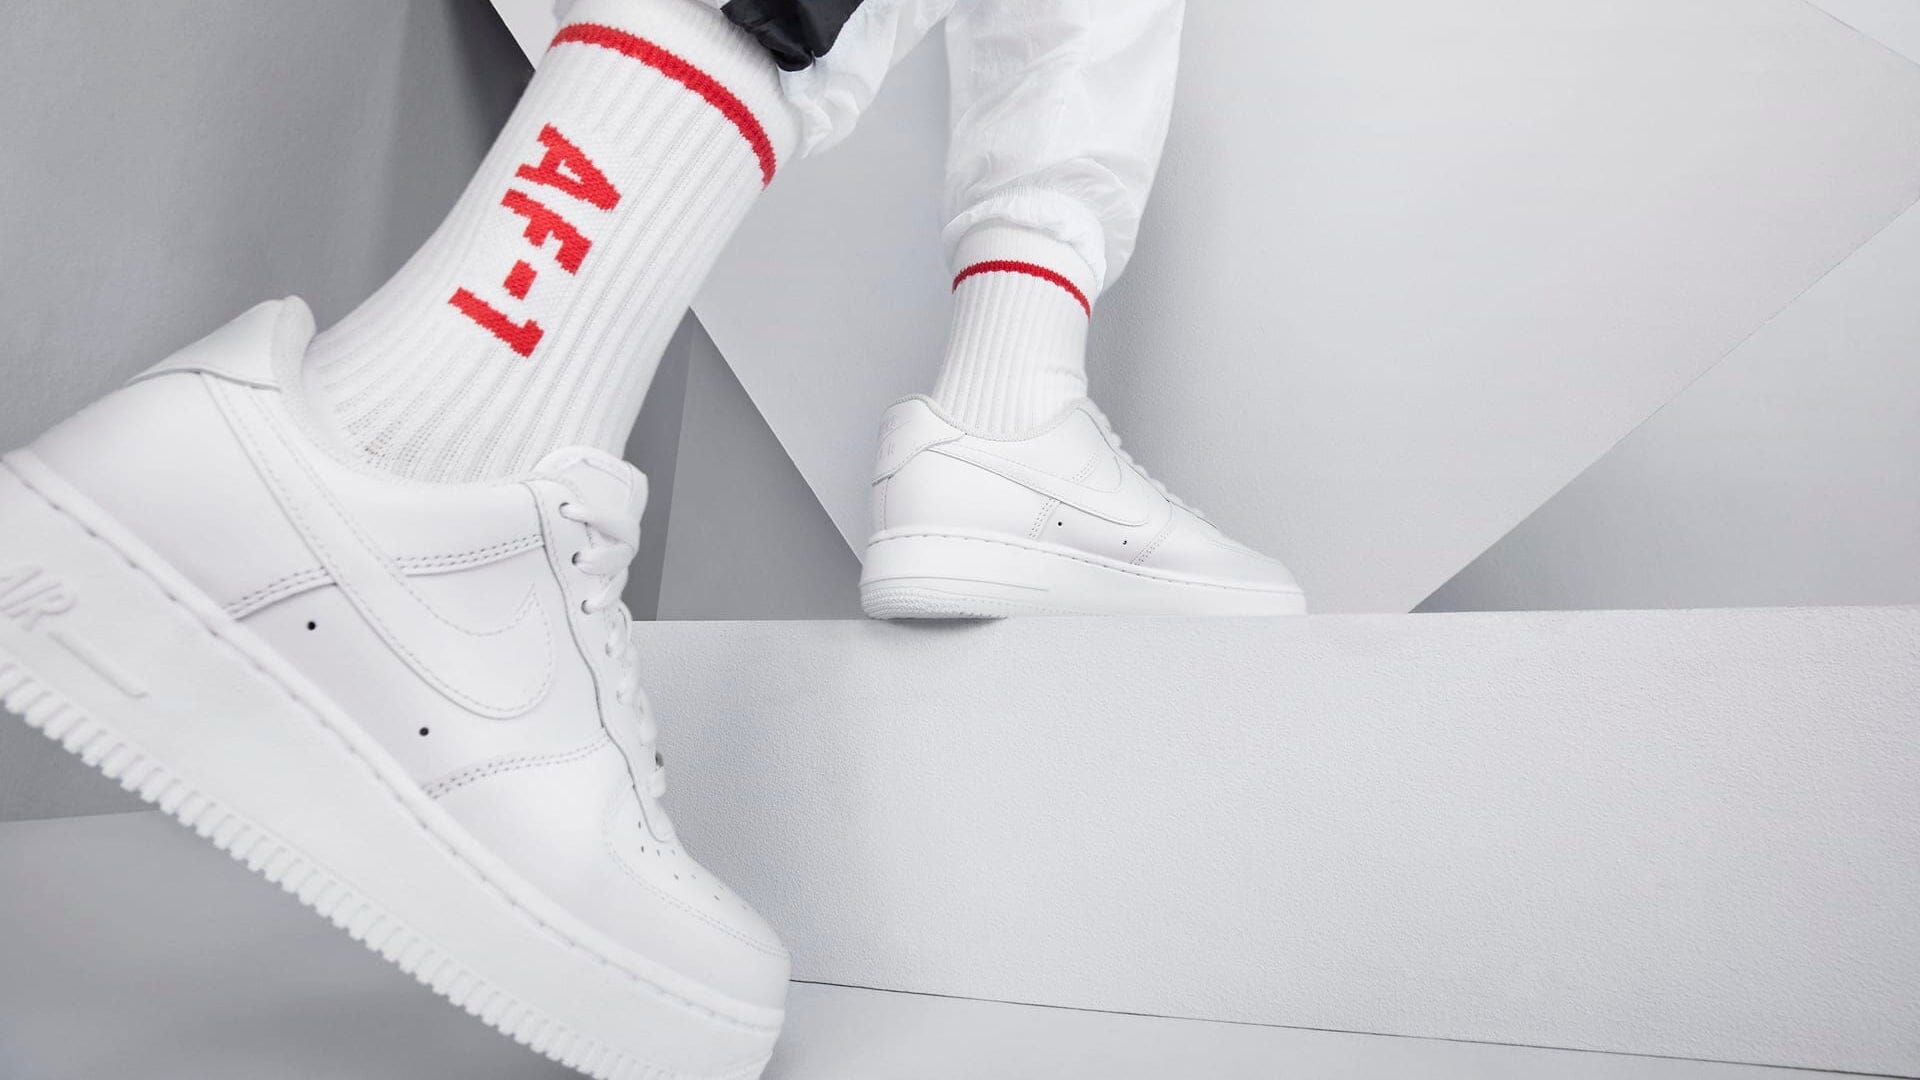 An Air Force 1 like NO OTHER! Nike x Off White Air Force 1 Mid On Foot  Review and How to Style 